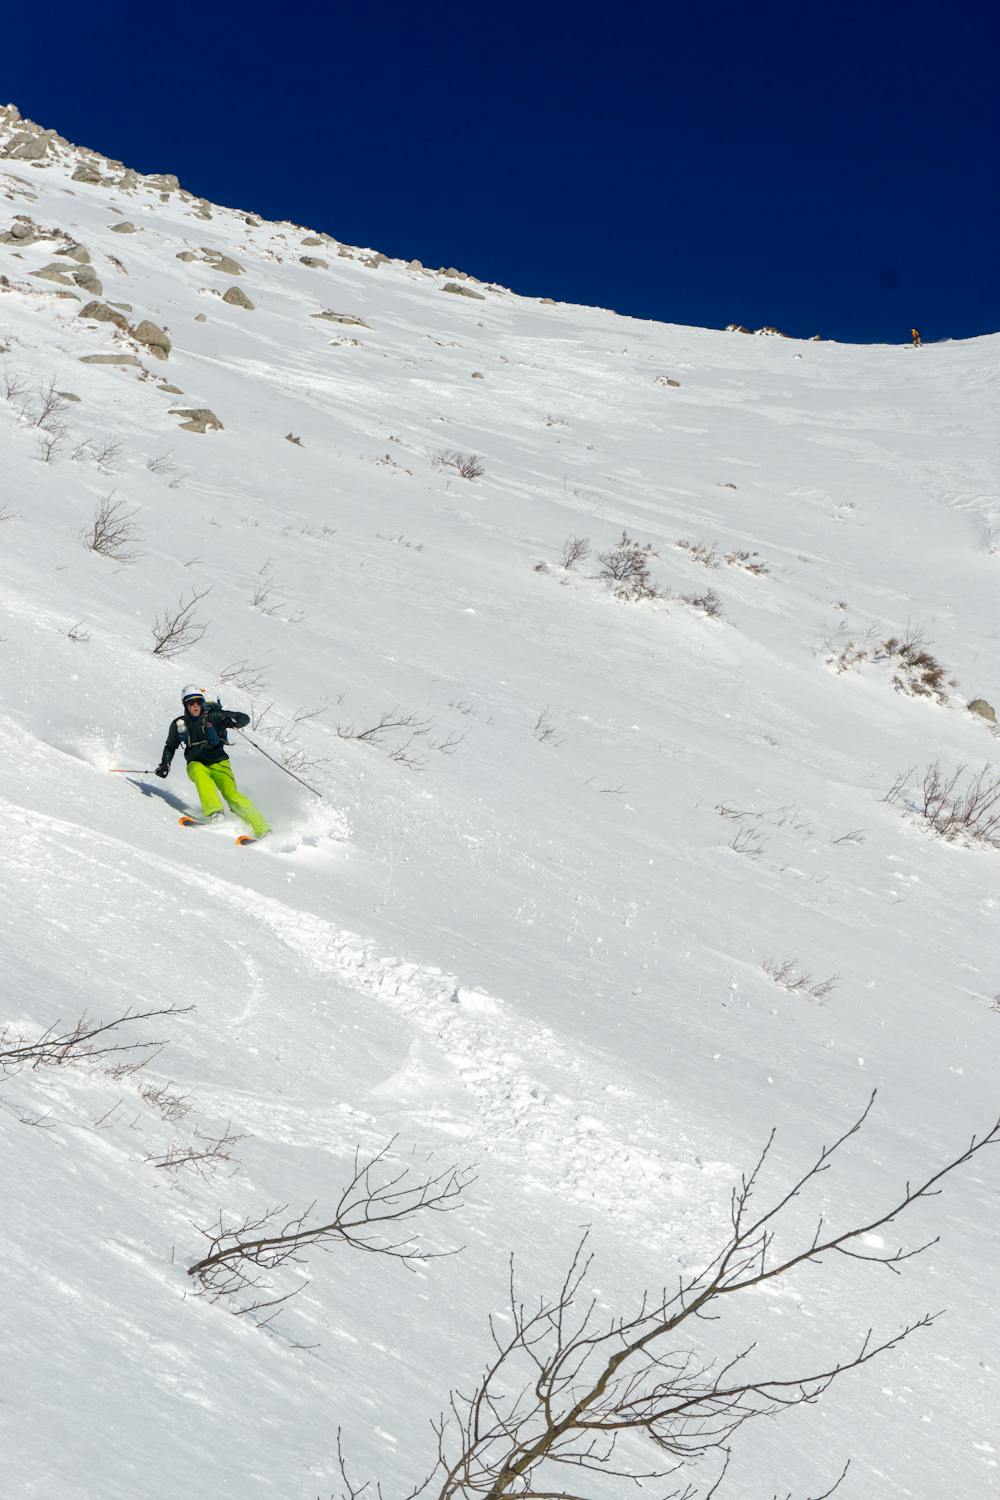 Skiing the southwest face in creamy pow conditions.